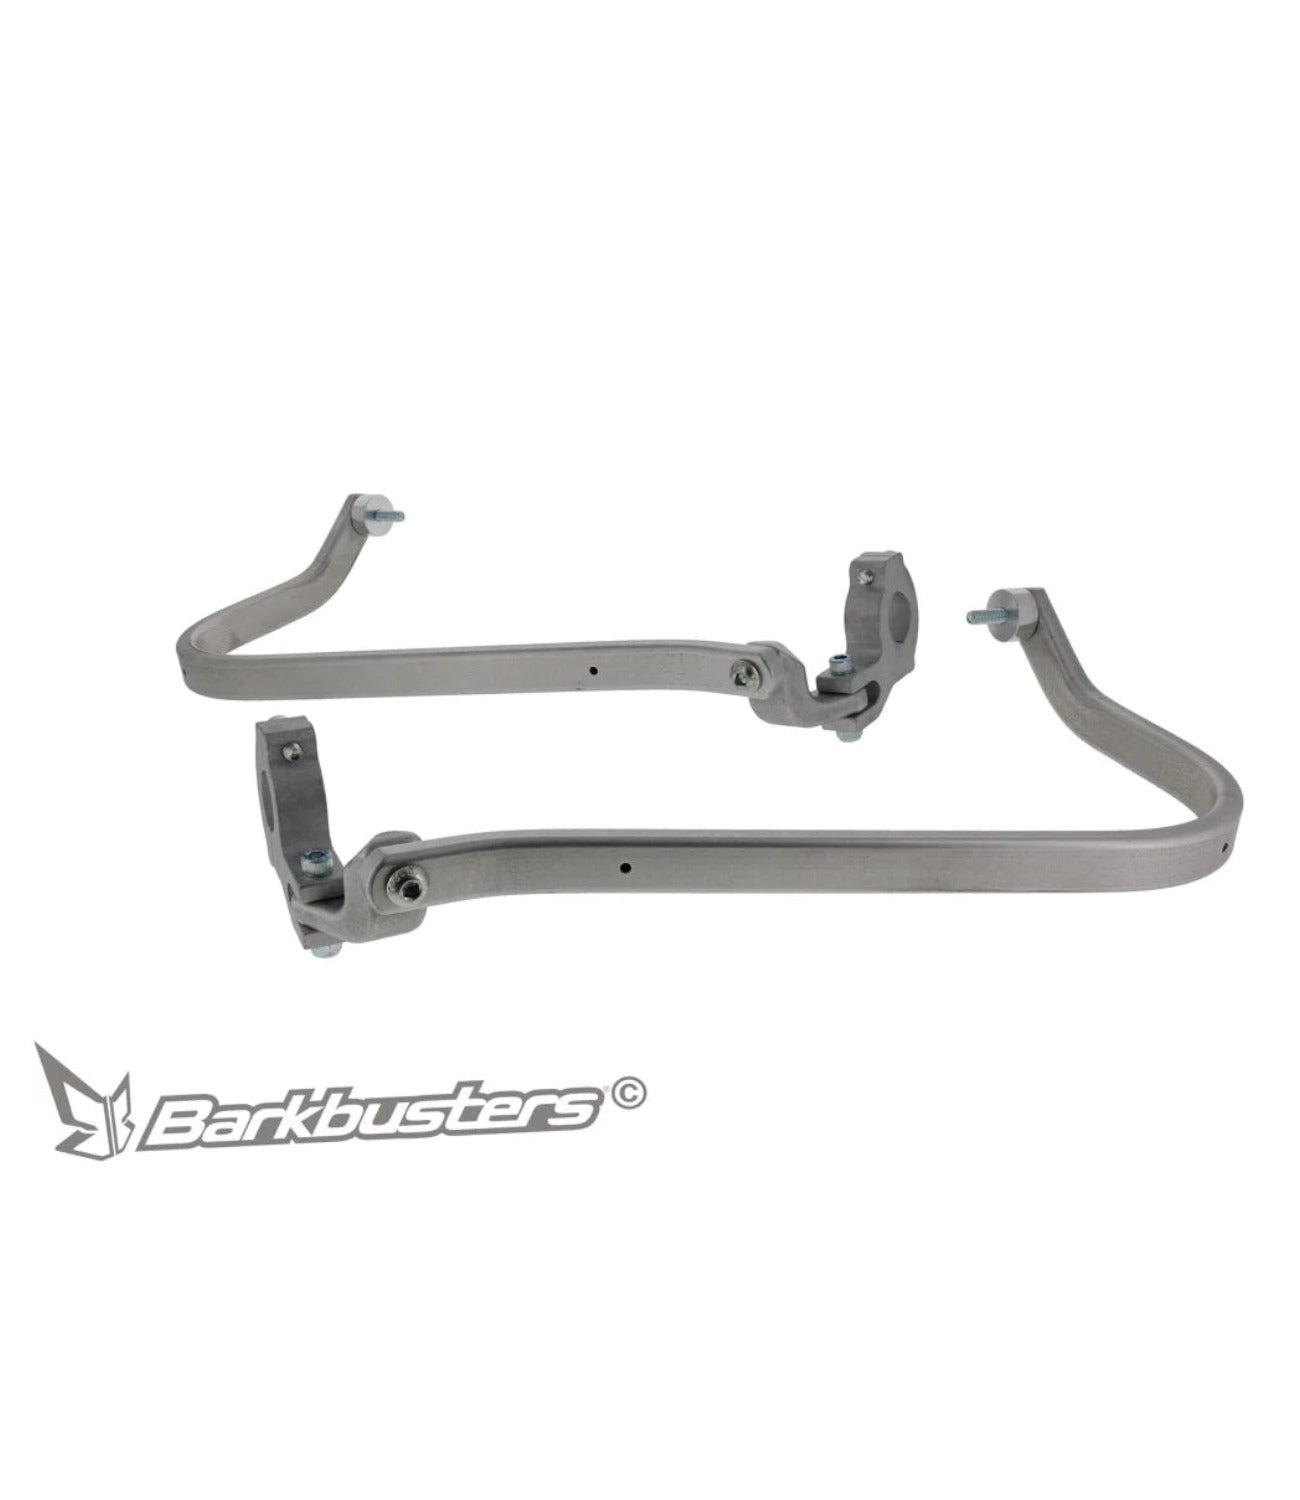 Barkbusters - Two Point Handguard Hardware Mount For Himalayan 450